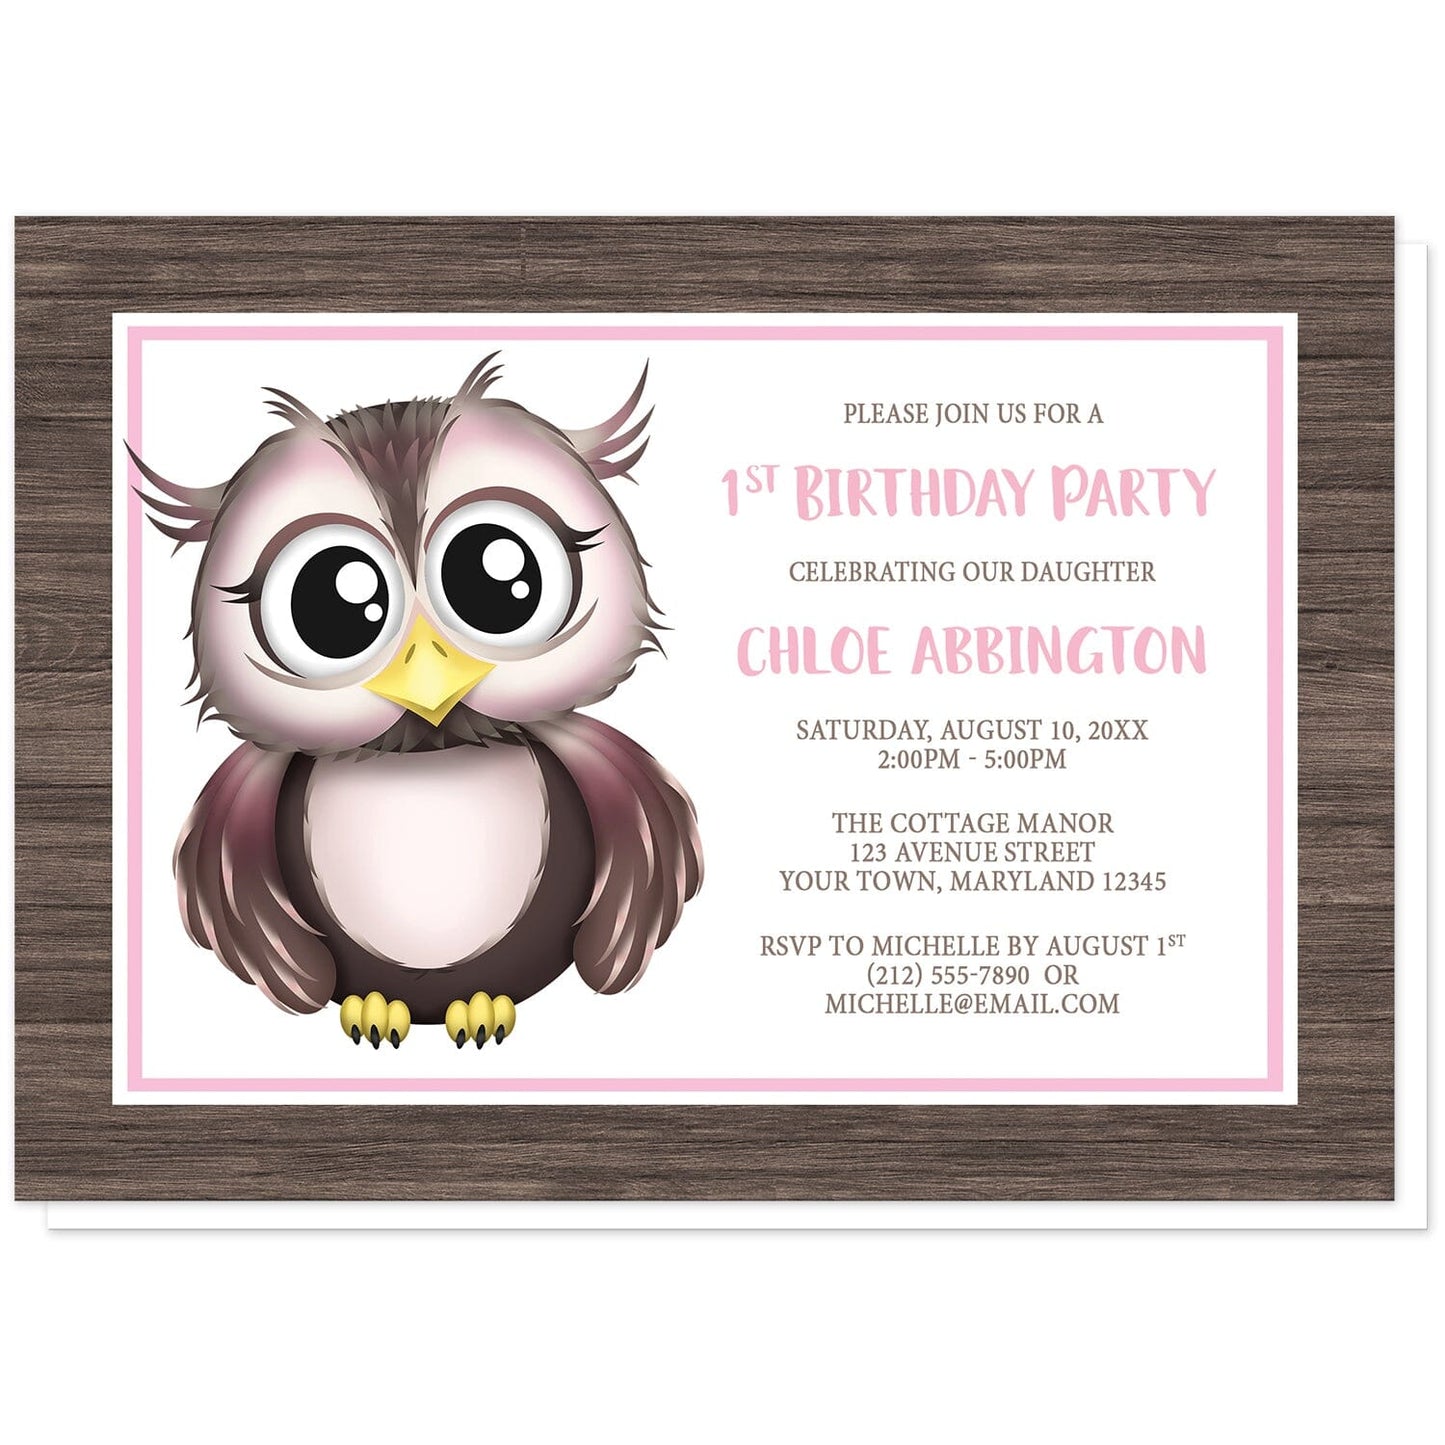 Adorable Owl Pink and Brown Birthday Party Invitations at Artistically Invited. Adorable owl pink and brown birthday party invitations for a 1st birthday or other year or milestone that are illustrated with a cute pink and brown owl and a rustic brown wood frame design. The personalized information you provide for your owl birthday party celebration will be printed in pink and brown over white next to the adorable owl. 